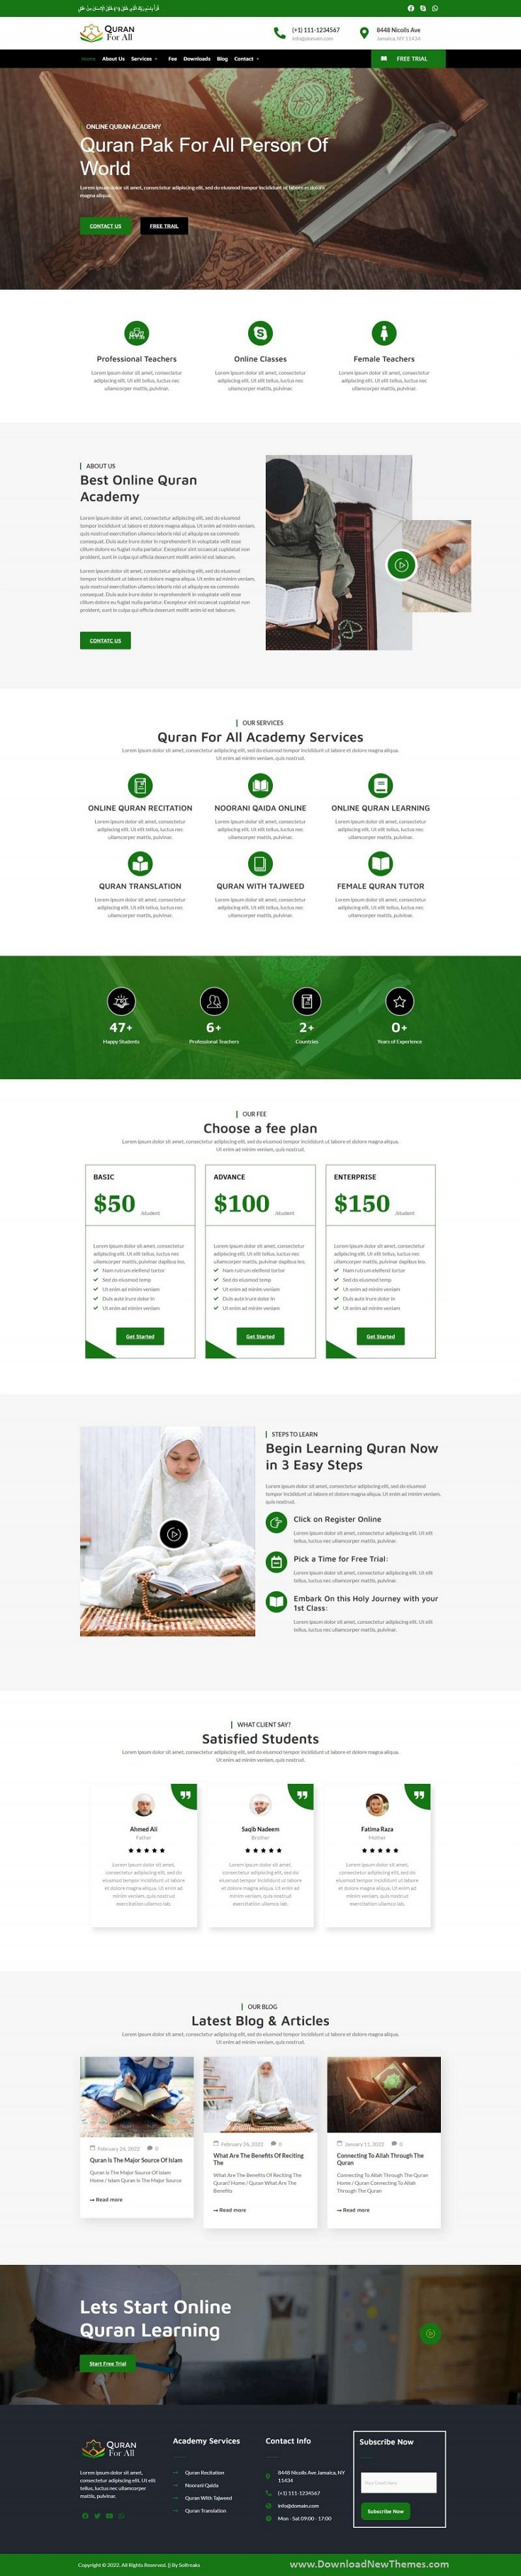 Download Study Academy Website Template Kit